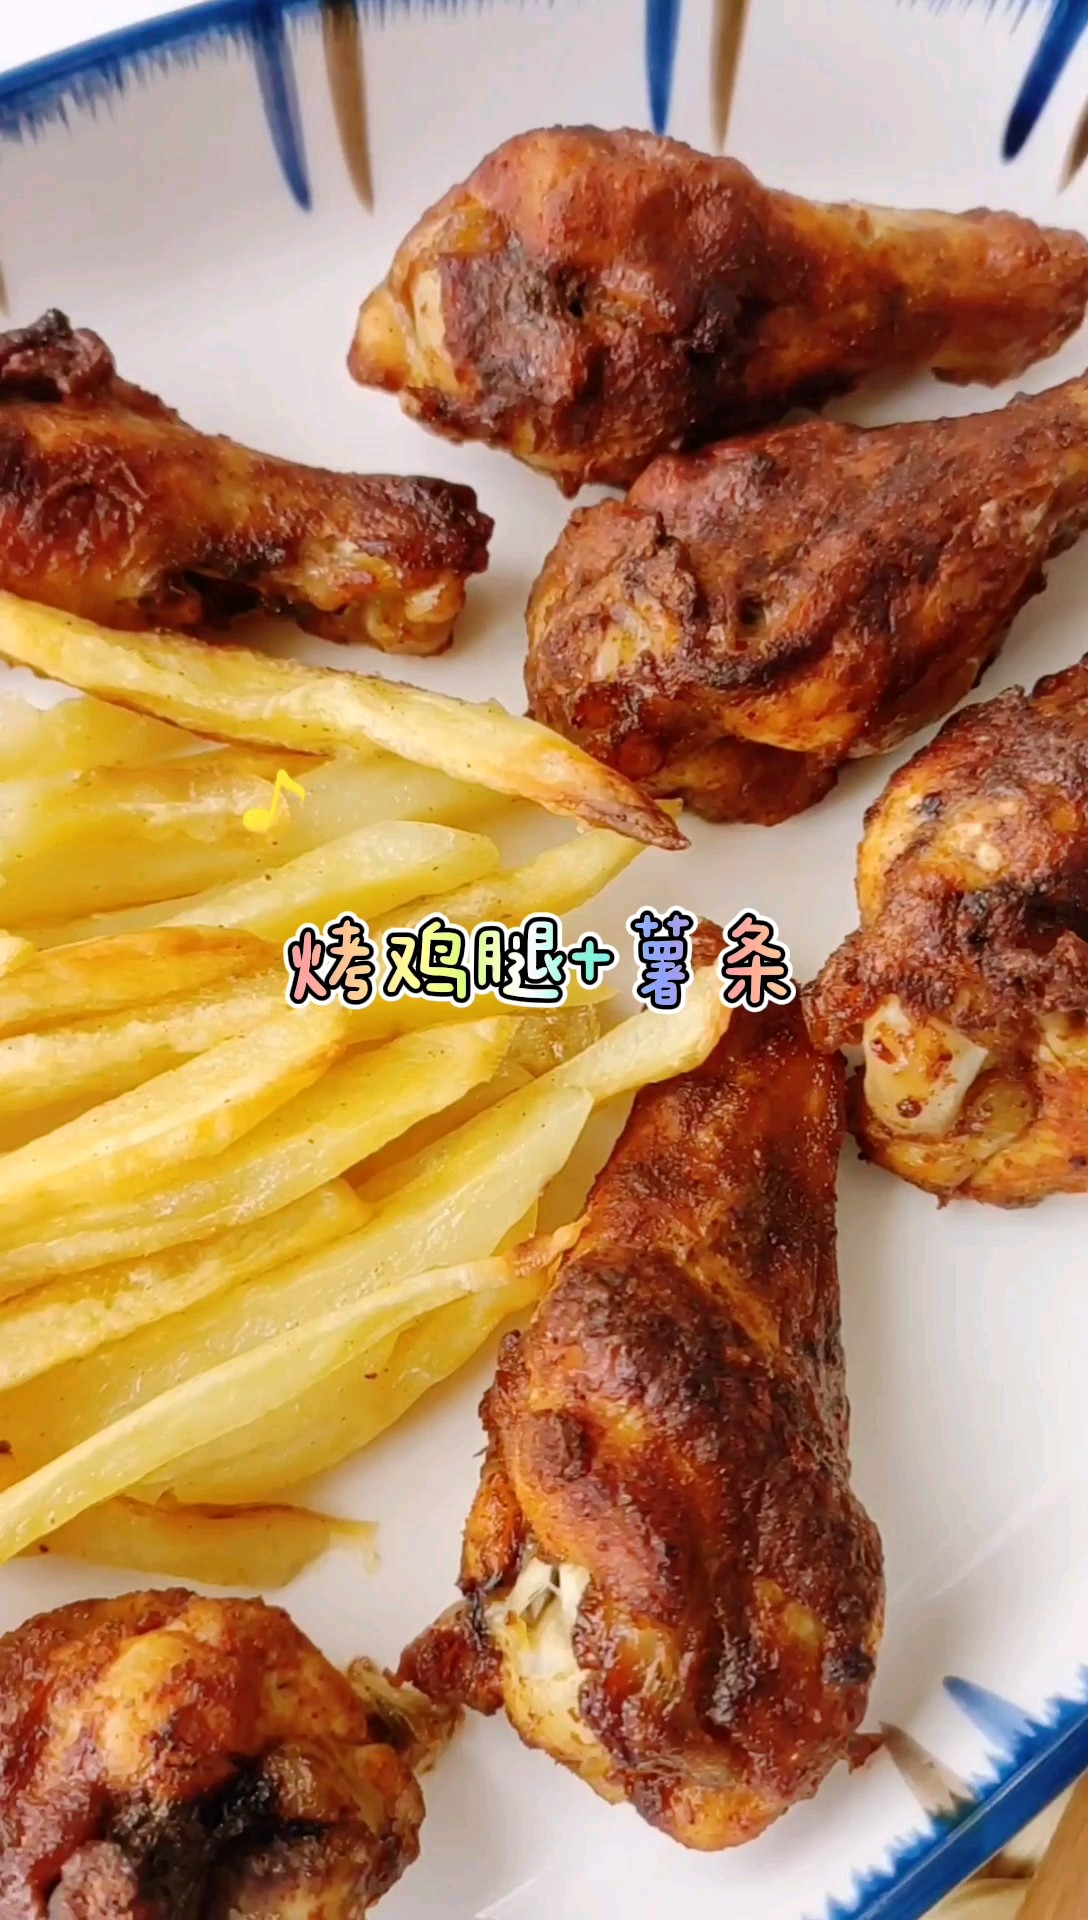 Roasted Chicken Drumsticks + French Fries